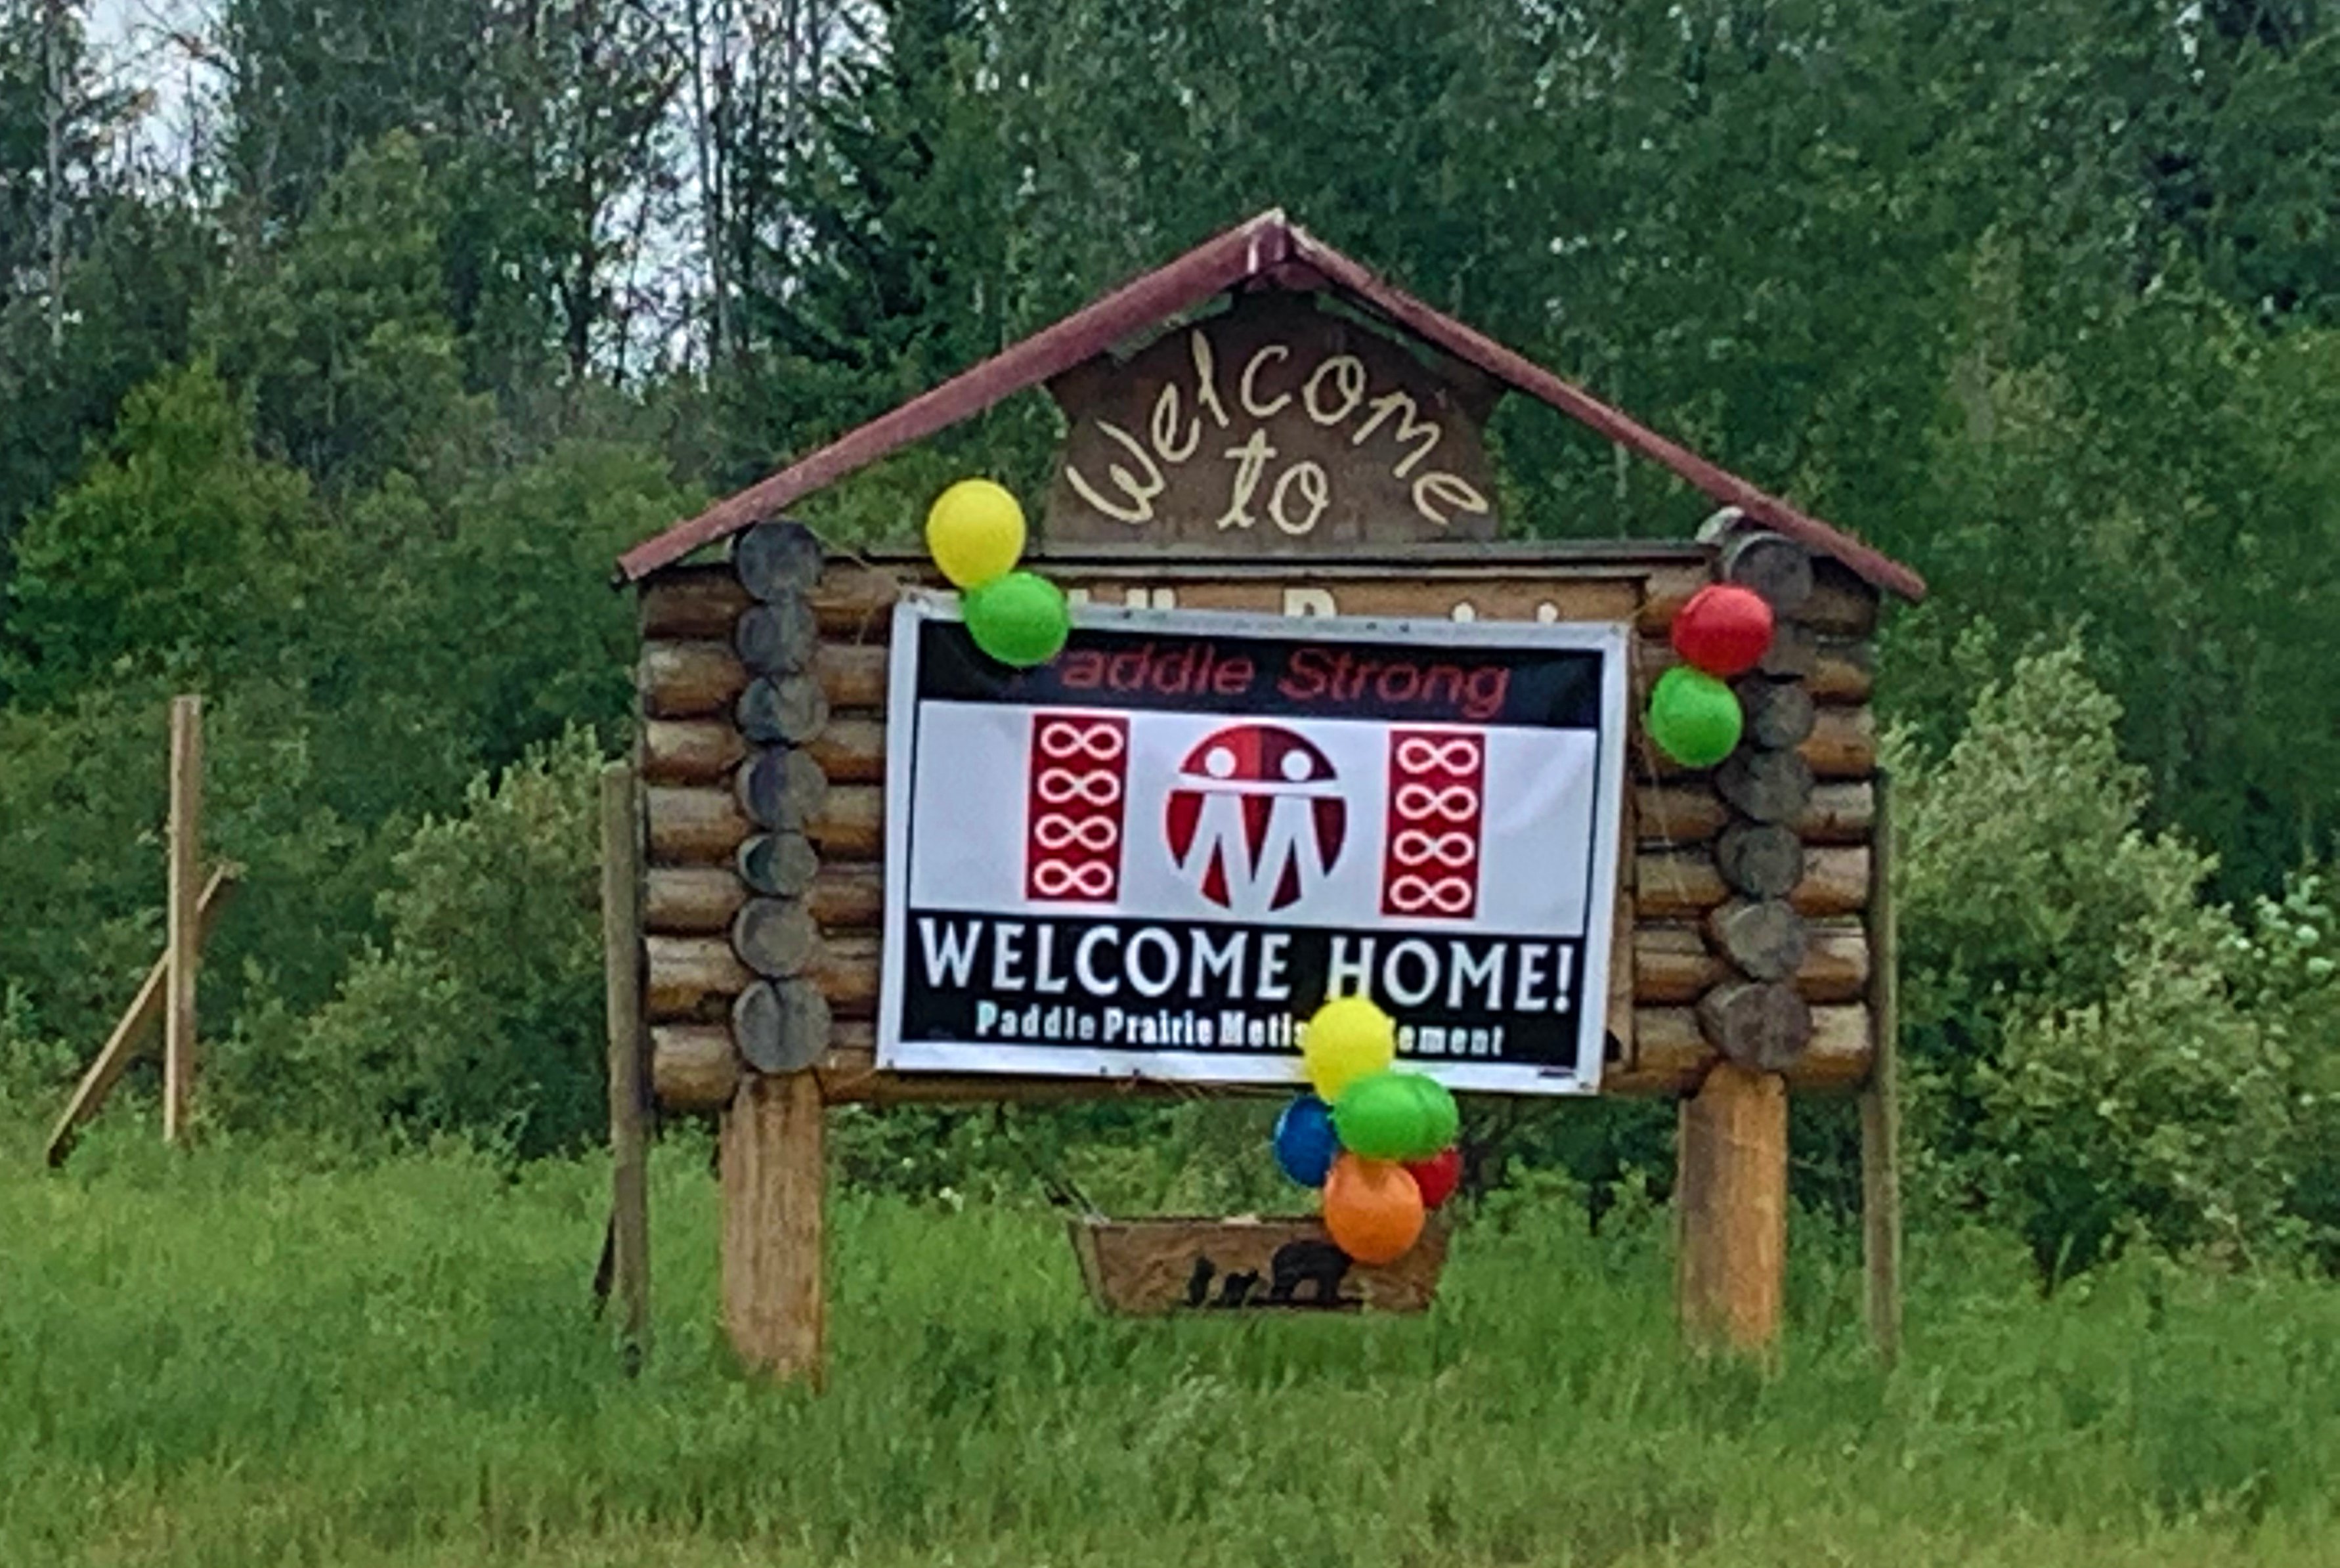 Peace River Forest Area Update - June 20, 2019